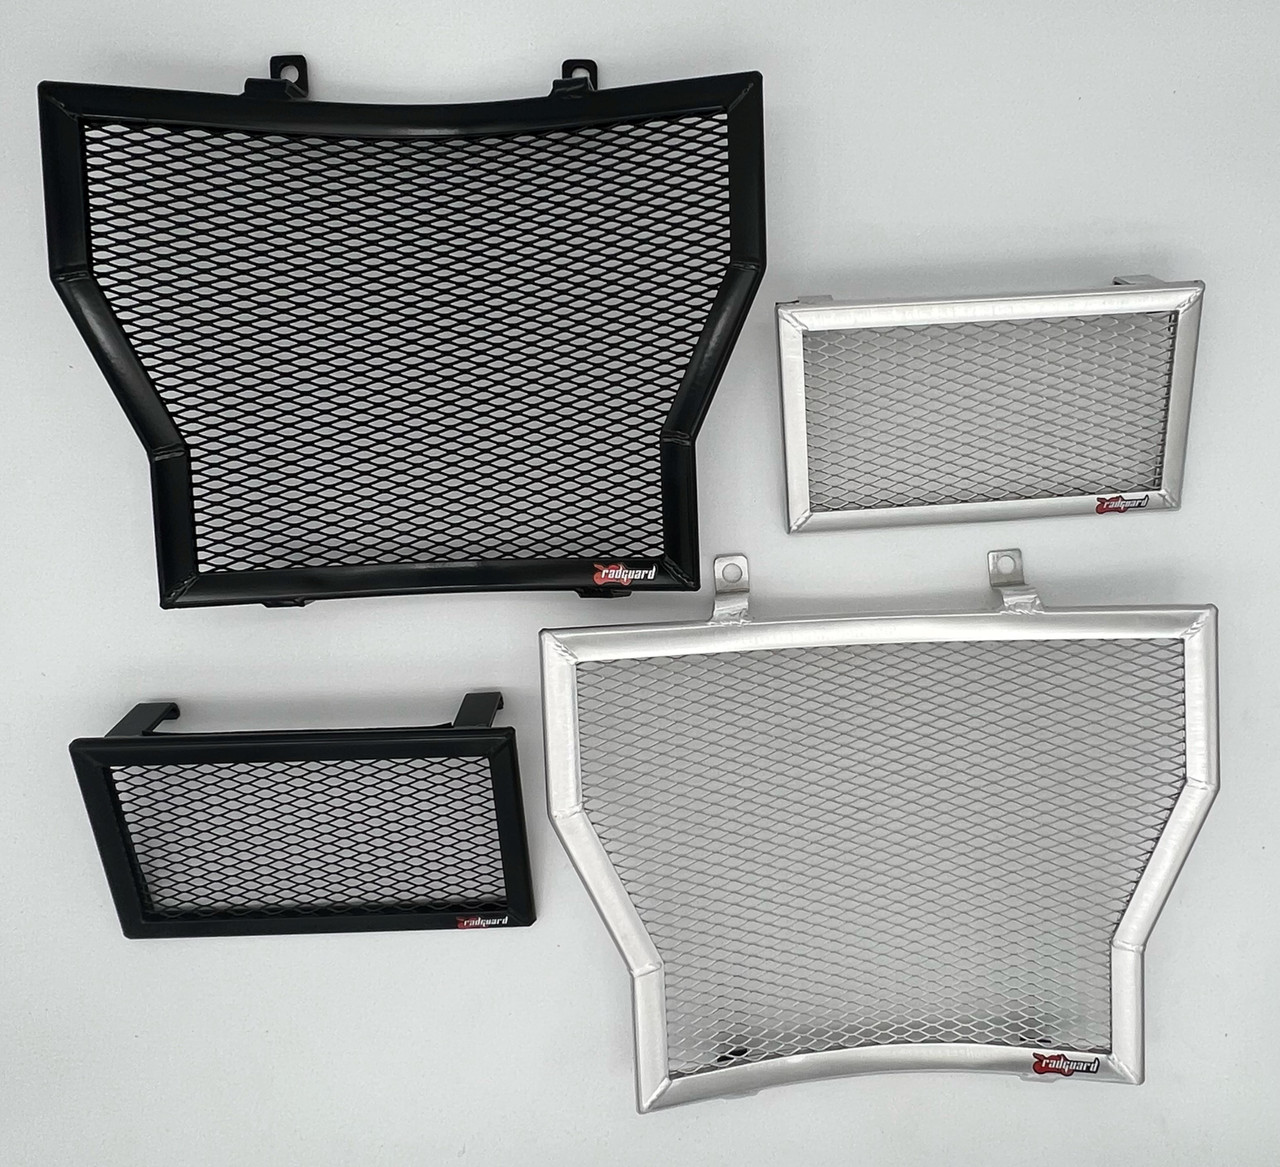 BMW S1000R, Radiator & Oil Cooler Guard, Radiator Guard, Rad Guard, Stone guard, radiator protection, Protector, stone grill, motorcycle guard